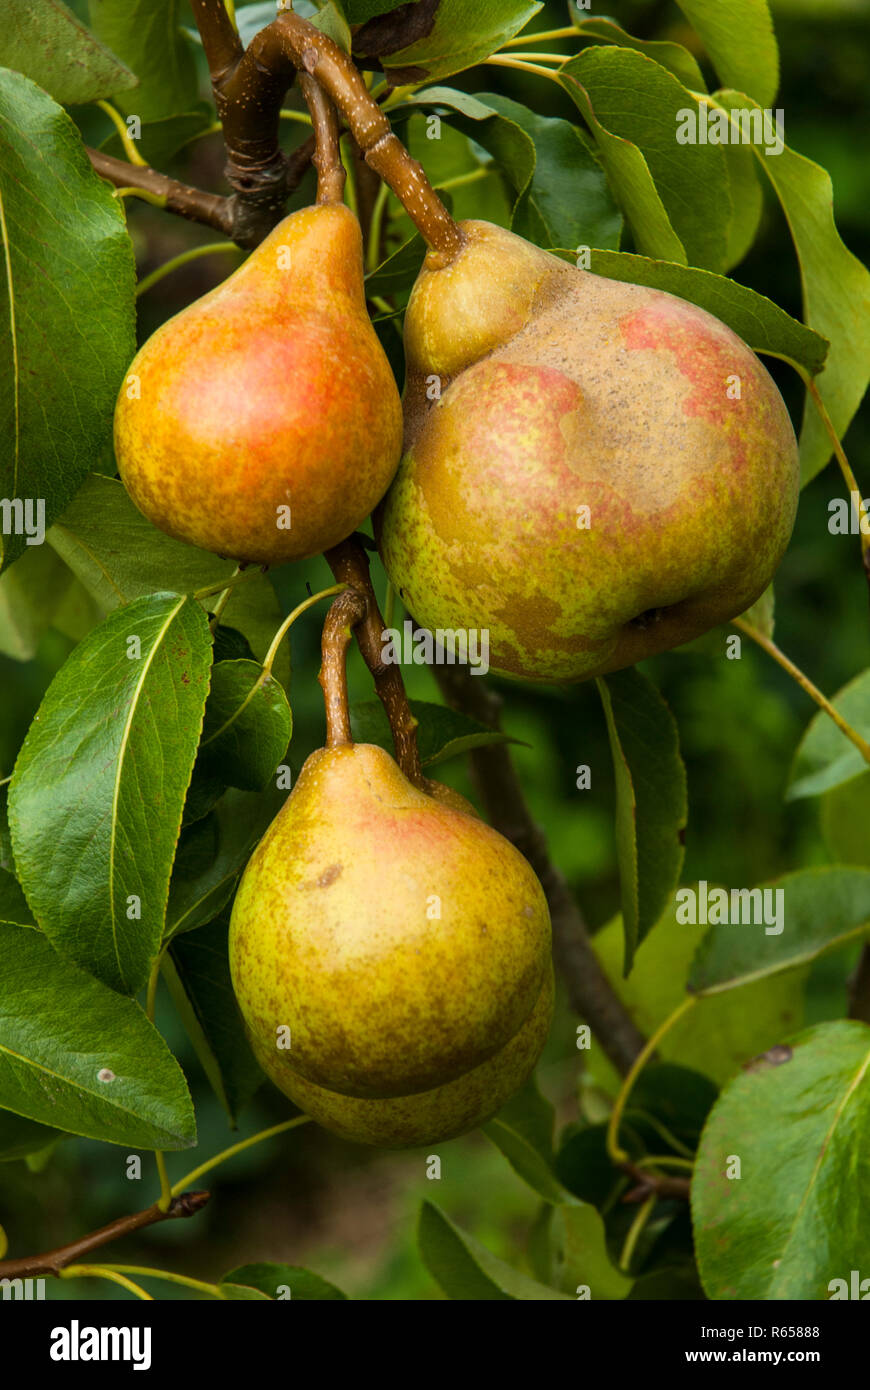 https://c8.alamy.com/comp/R65888/ripe-comice-pears-doyenne-du-comice-growing-naturally-on-a-bough-in-the-summer-sun-R65888.jpg